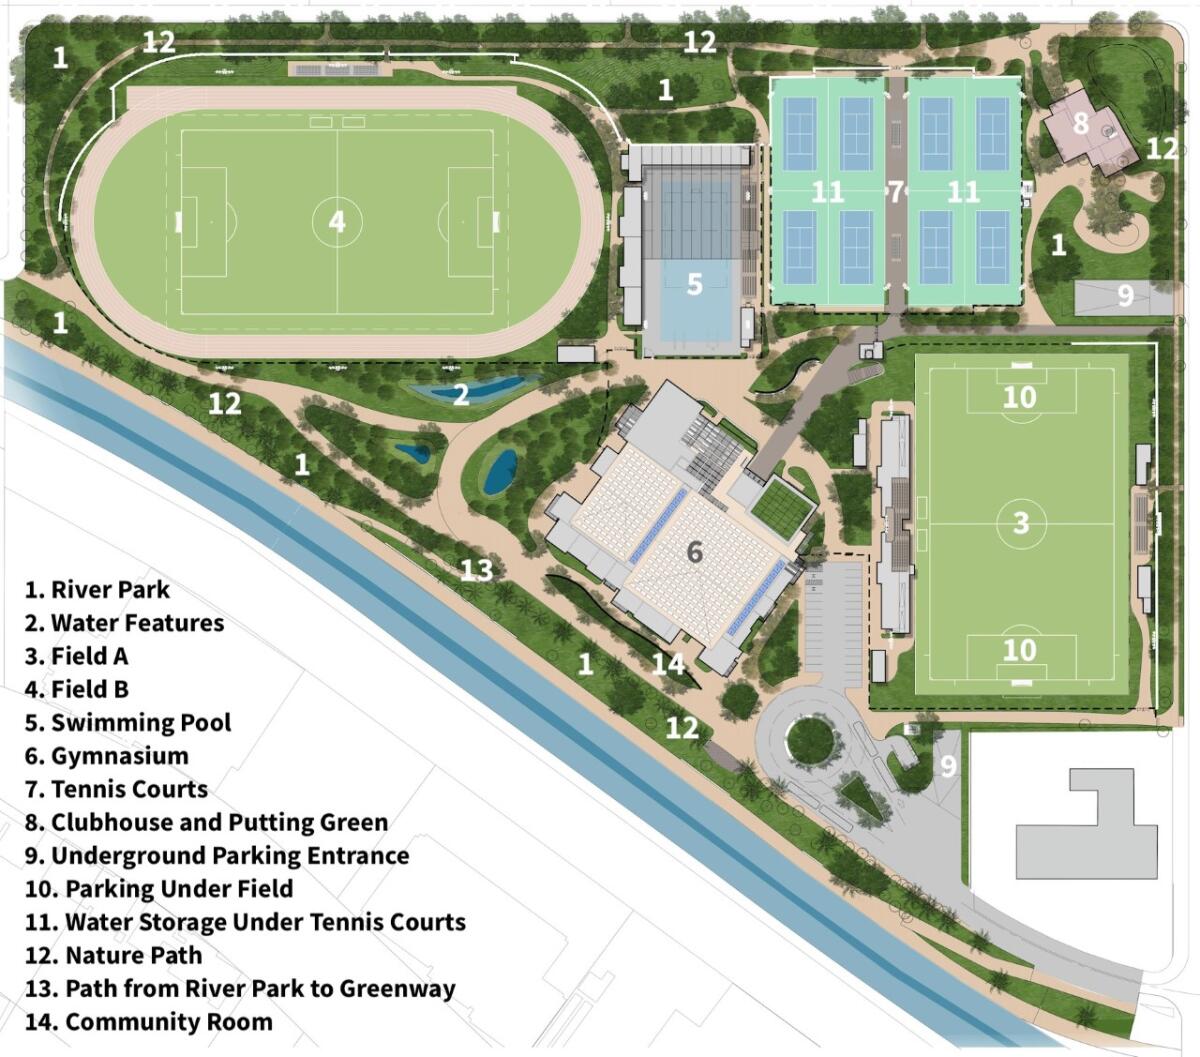 Graphic showing plans for an athletics complex.